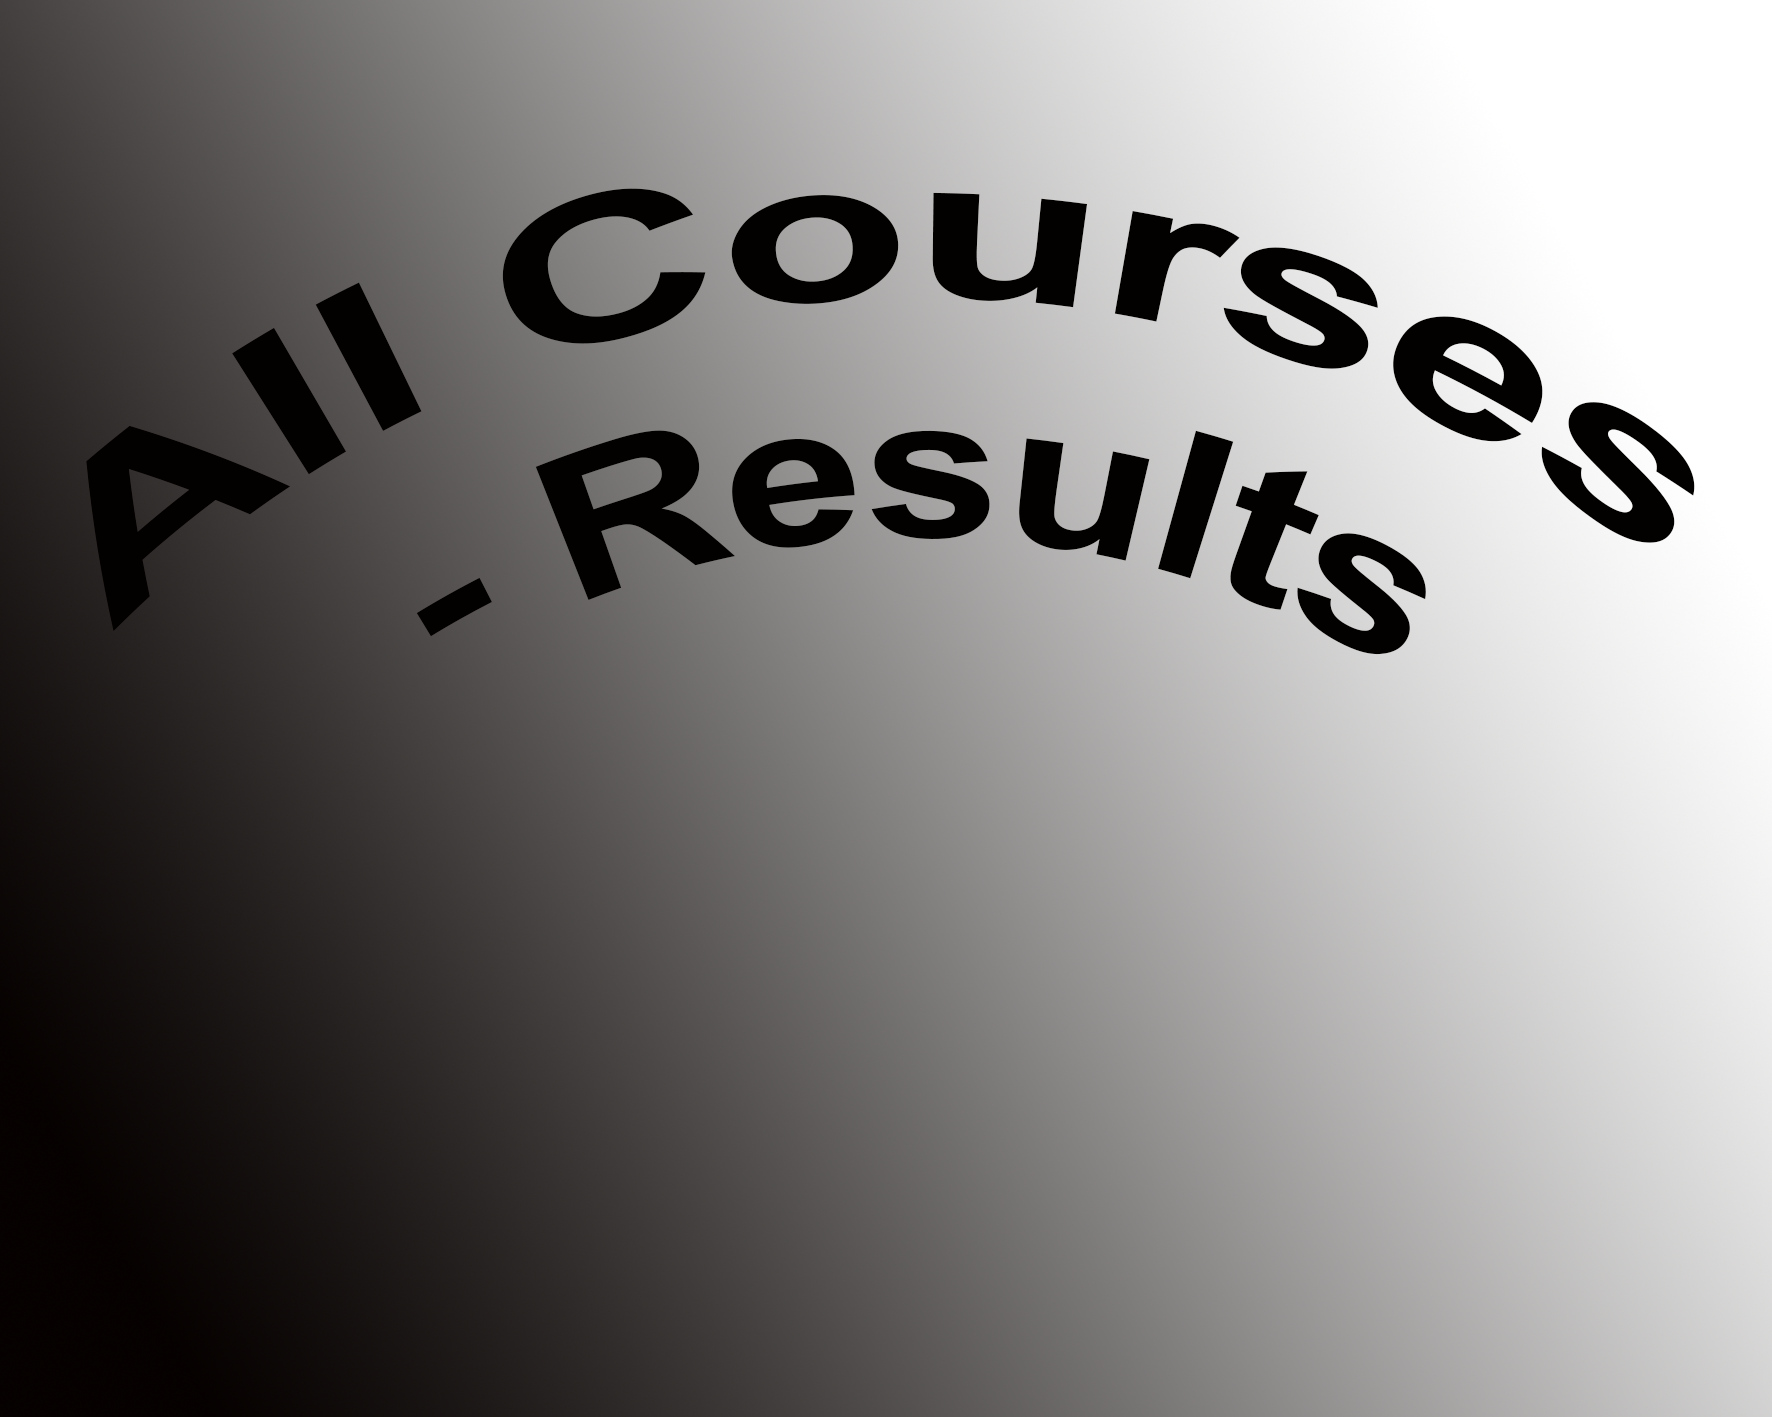 2021 - 1st Semester Results - All Courses